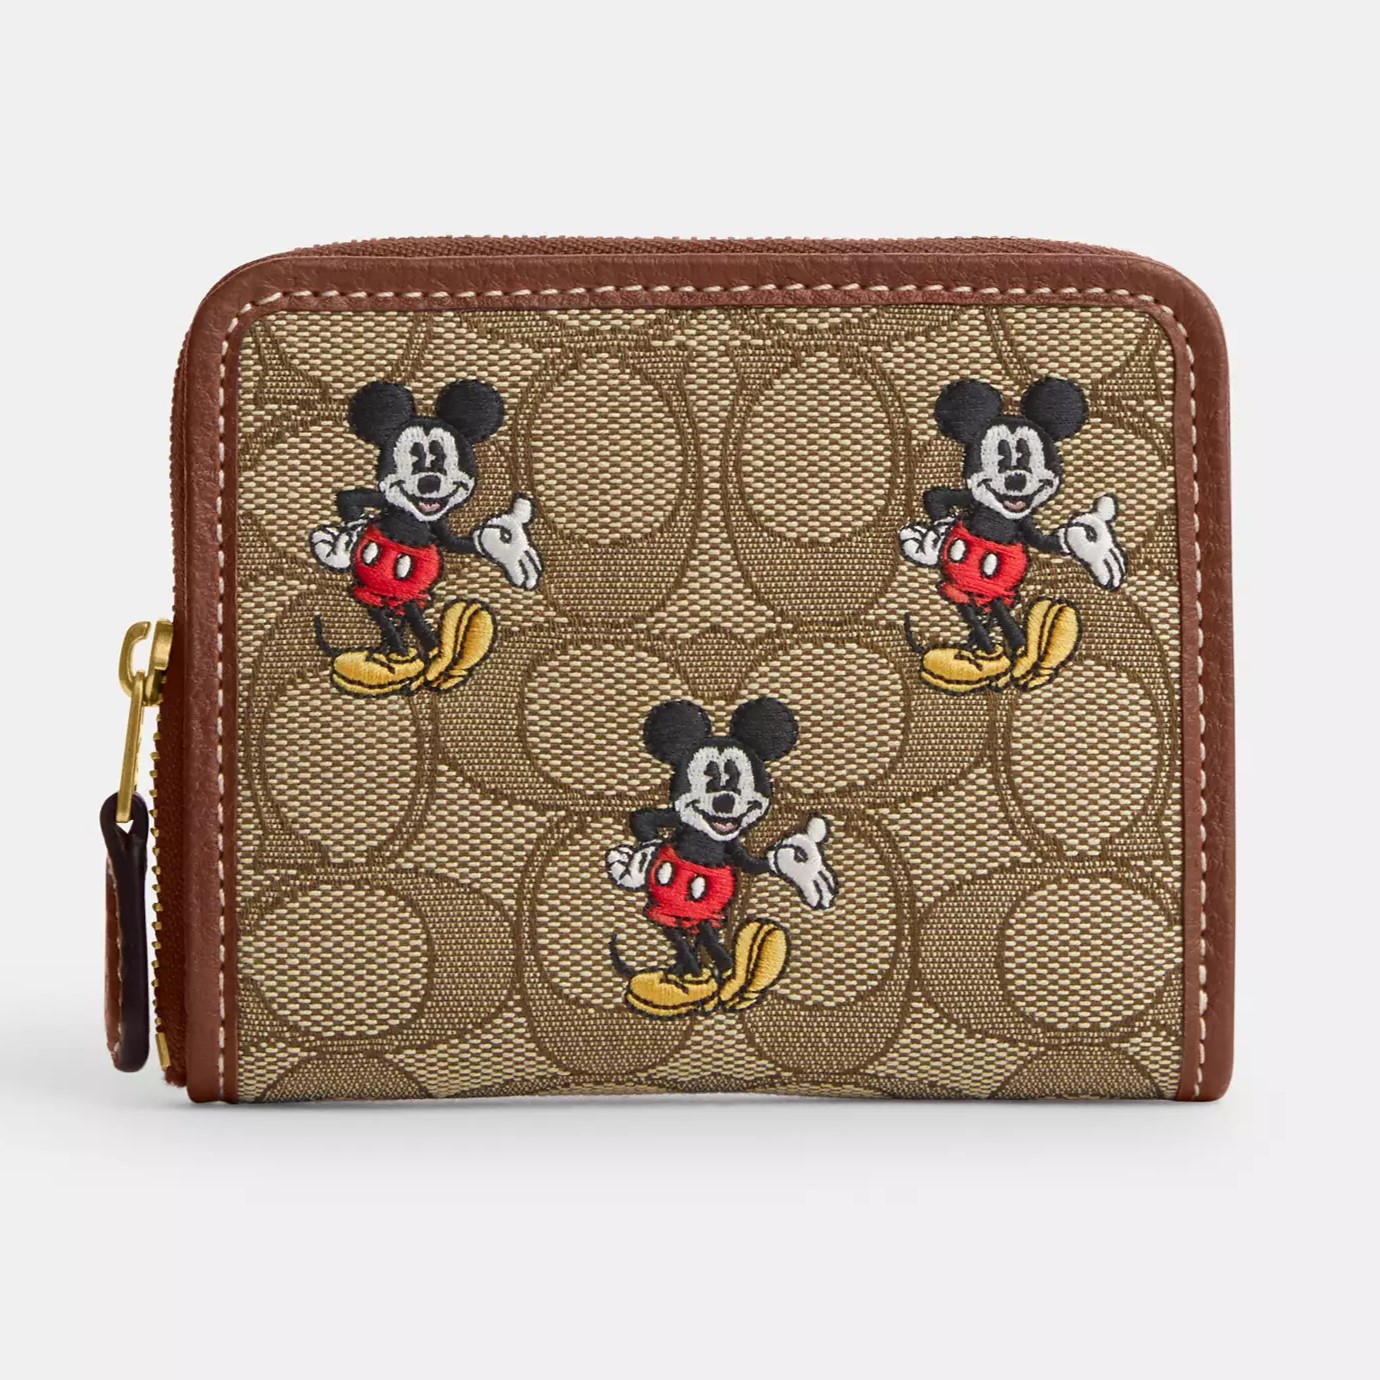 VÍ NỮ NGẮN DISNEY X COACH SMALL ZIP AROUND WALLET IN SIGNATURE JACQUARD WITH MICKEY MOUSE PRINT CN035 4